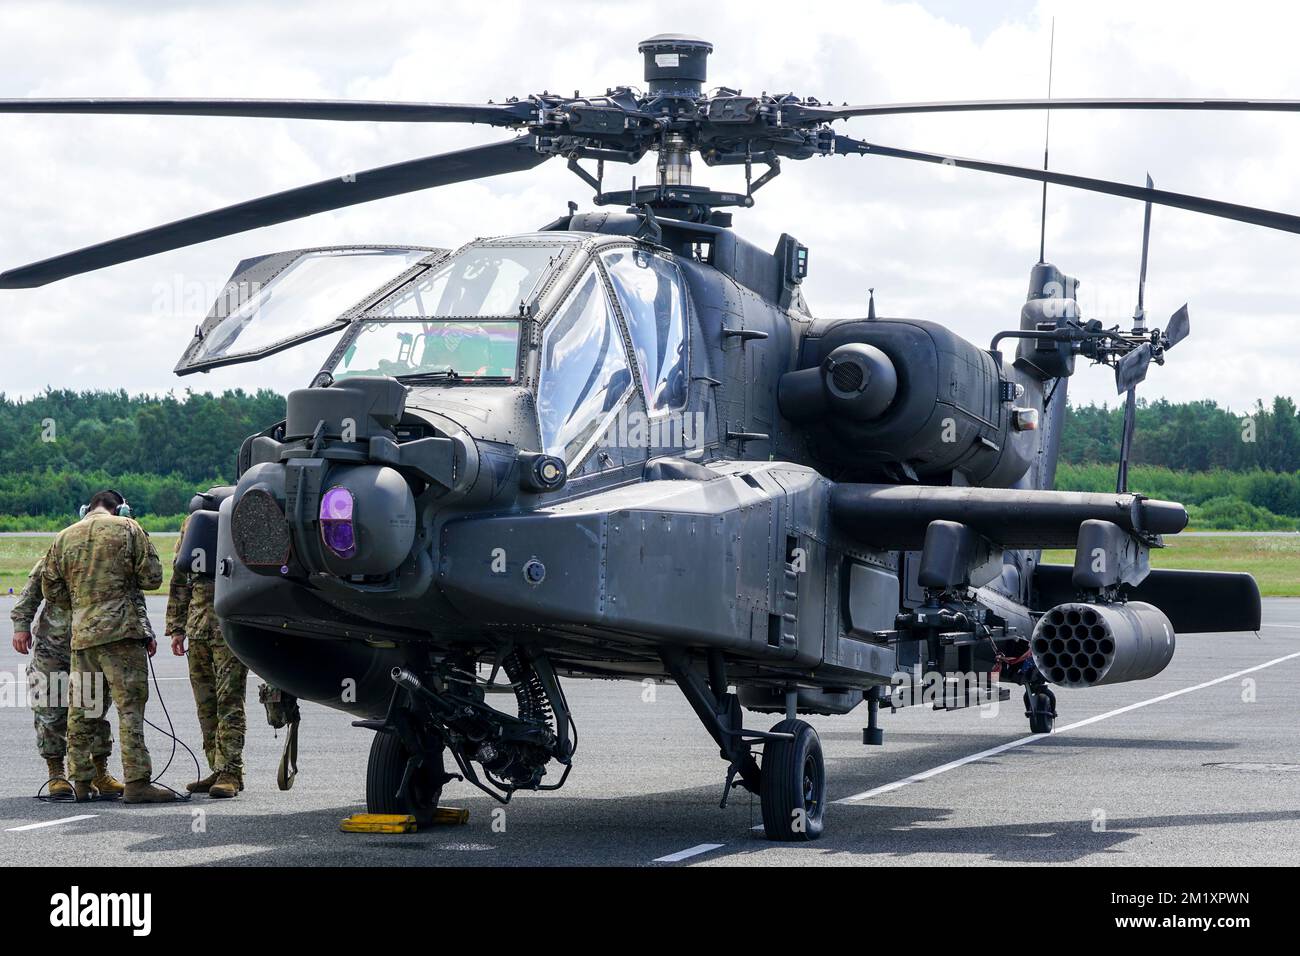 Liepaja, Latvia - August 07, 2022: AH-64D Apache attack helicopter from United States army with crew after landing at the airport runway Stock Photo